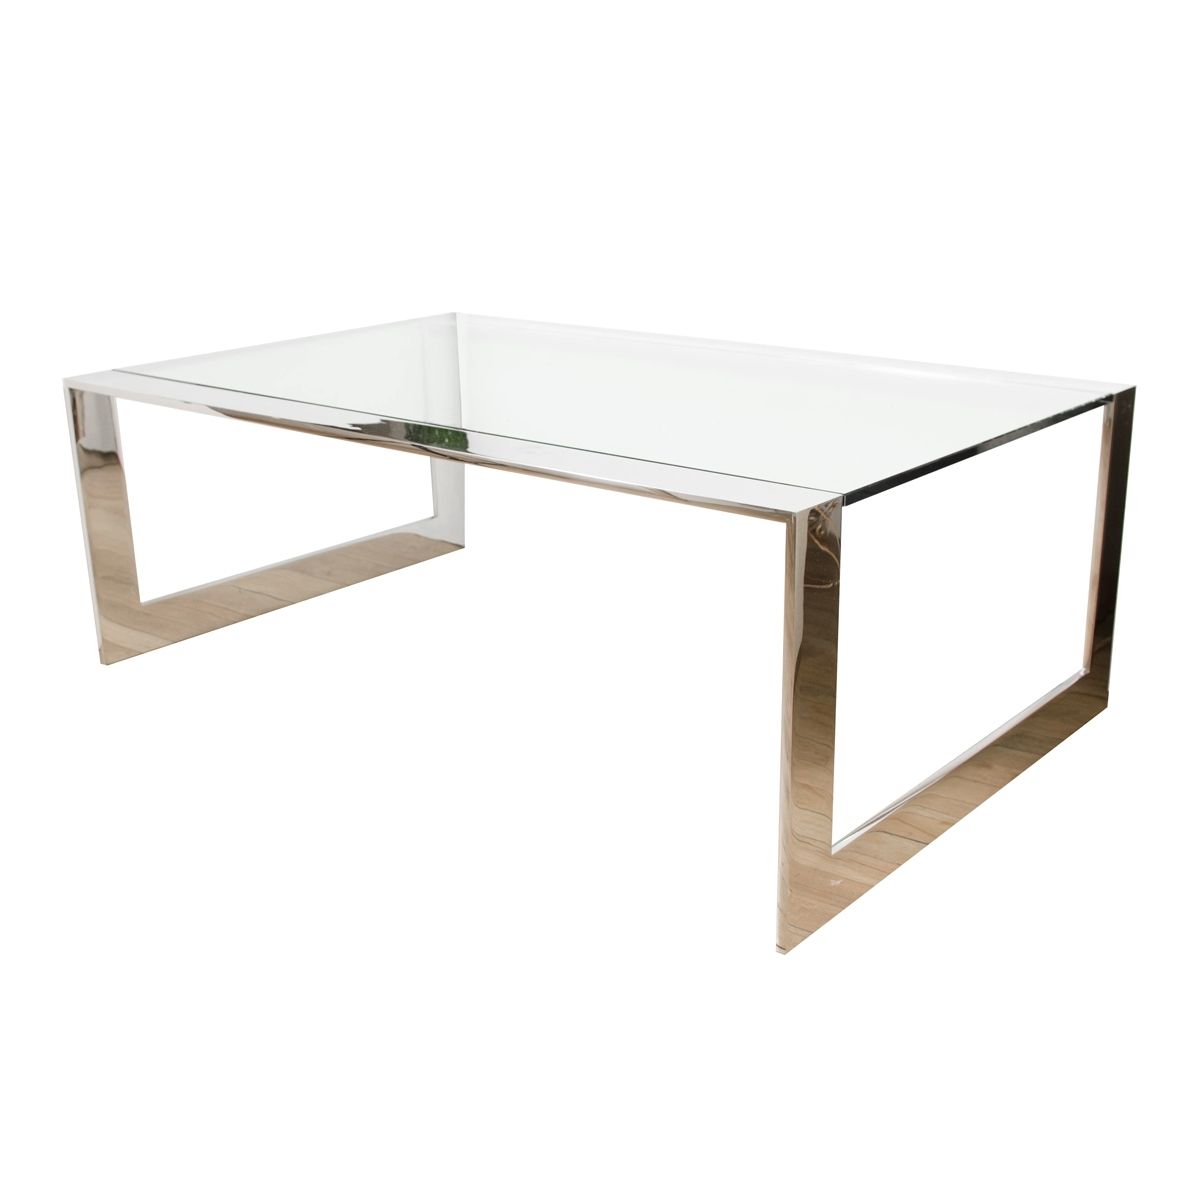 Chrome Waterfall Coffee Table With Glass Top | Coffee Tables | John Within Square Waterfall Coffee Tables (View 7 of 30)